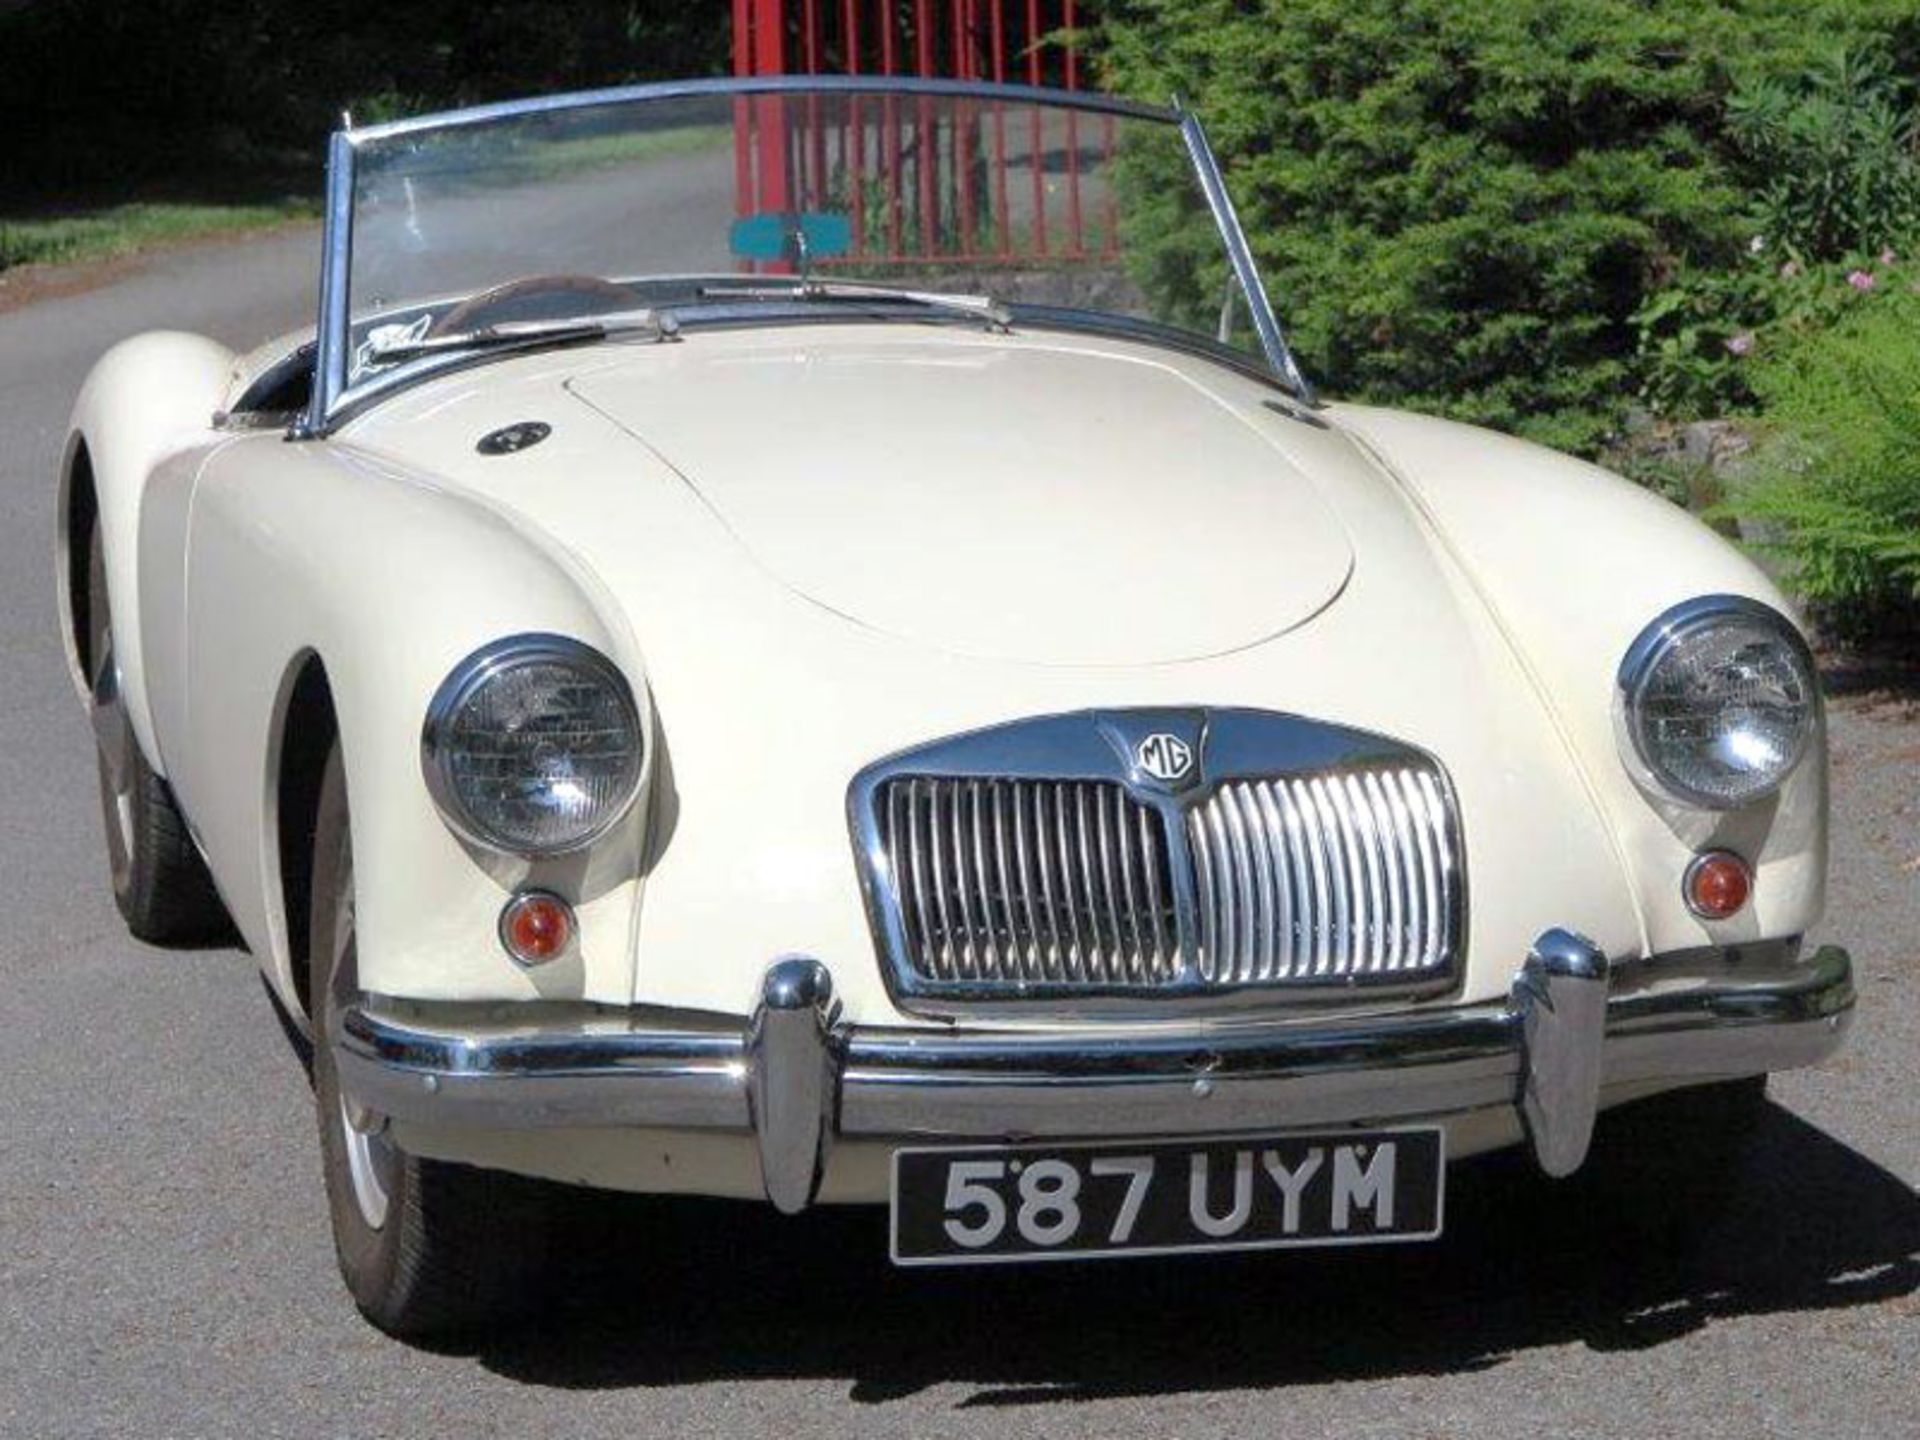 1959 MG A 1500 Roadster - Image 2 of 9